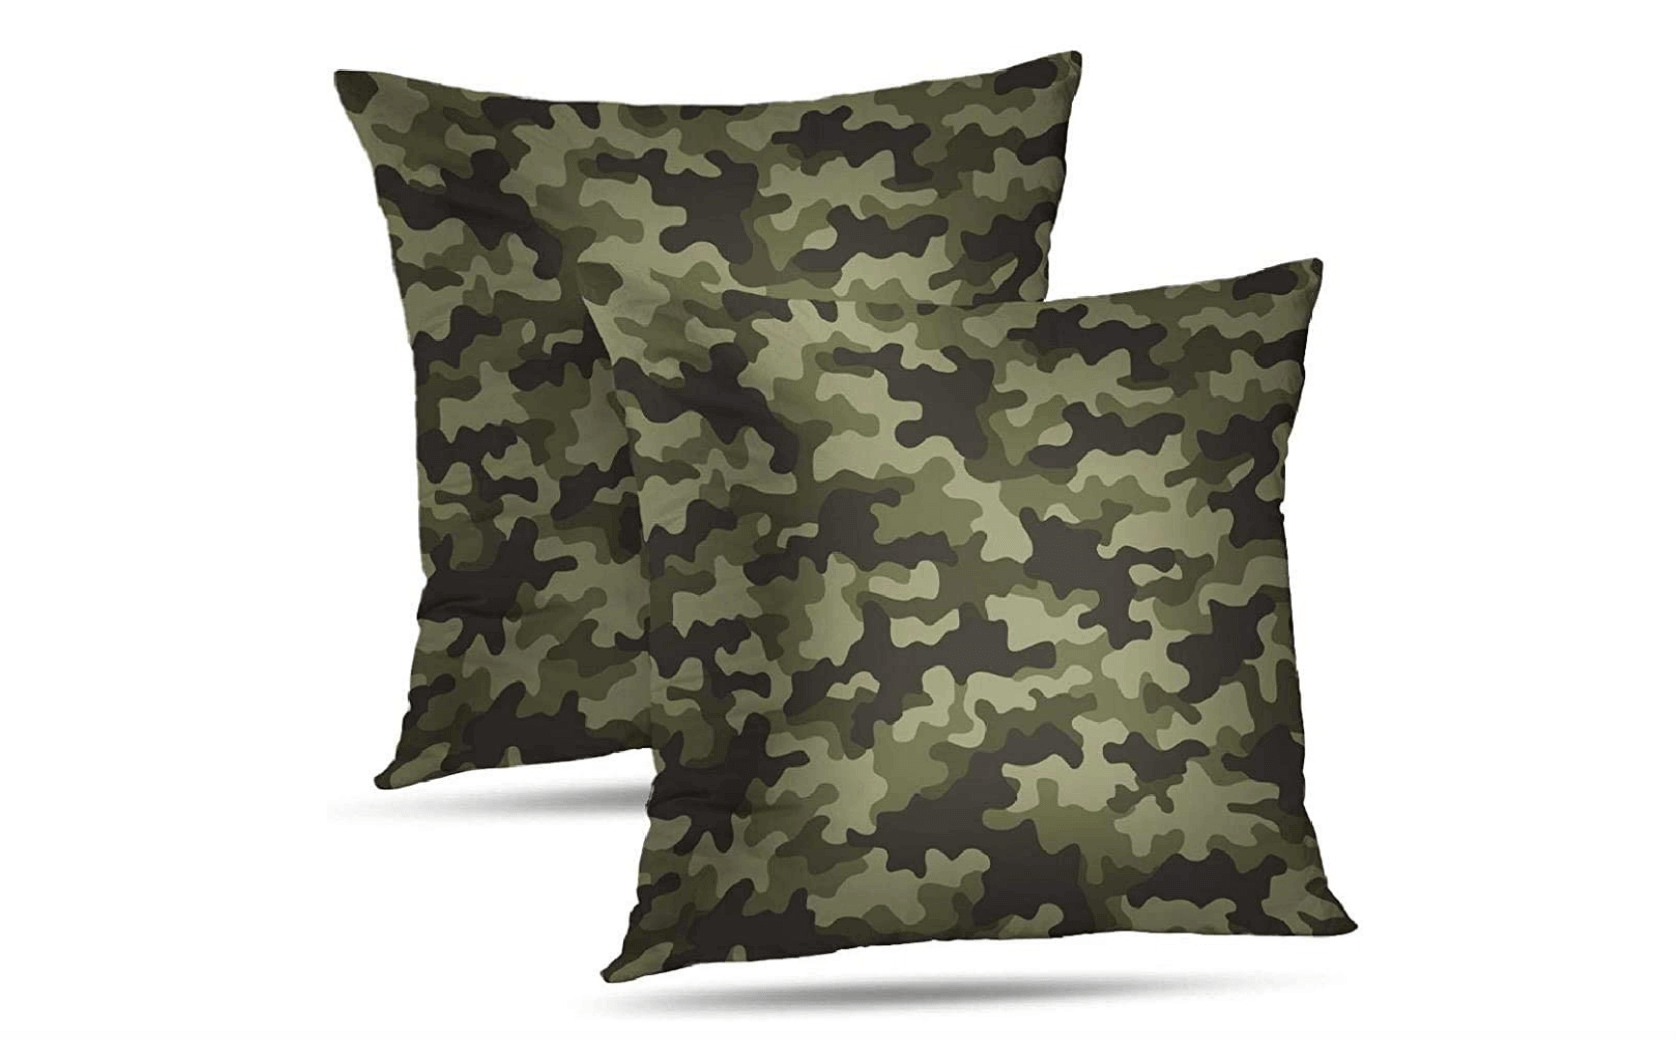 Two pillows with camouflage print